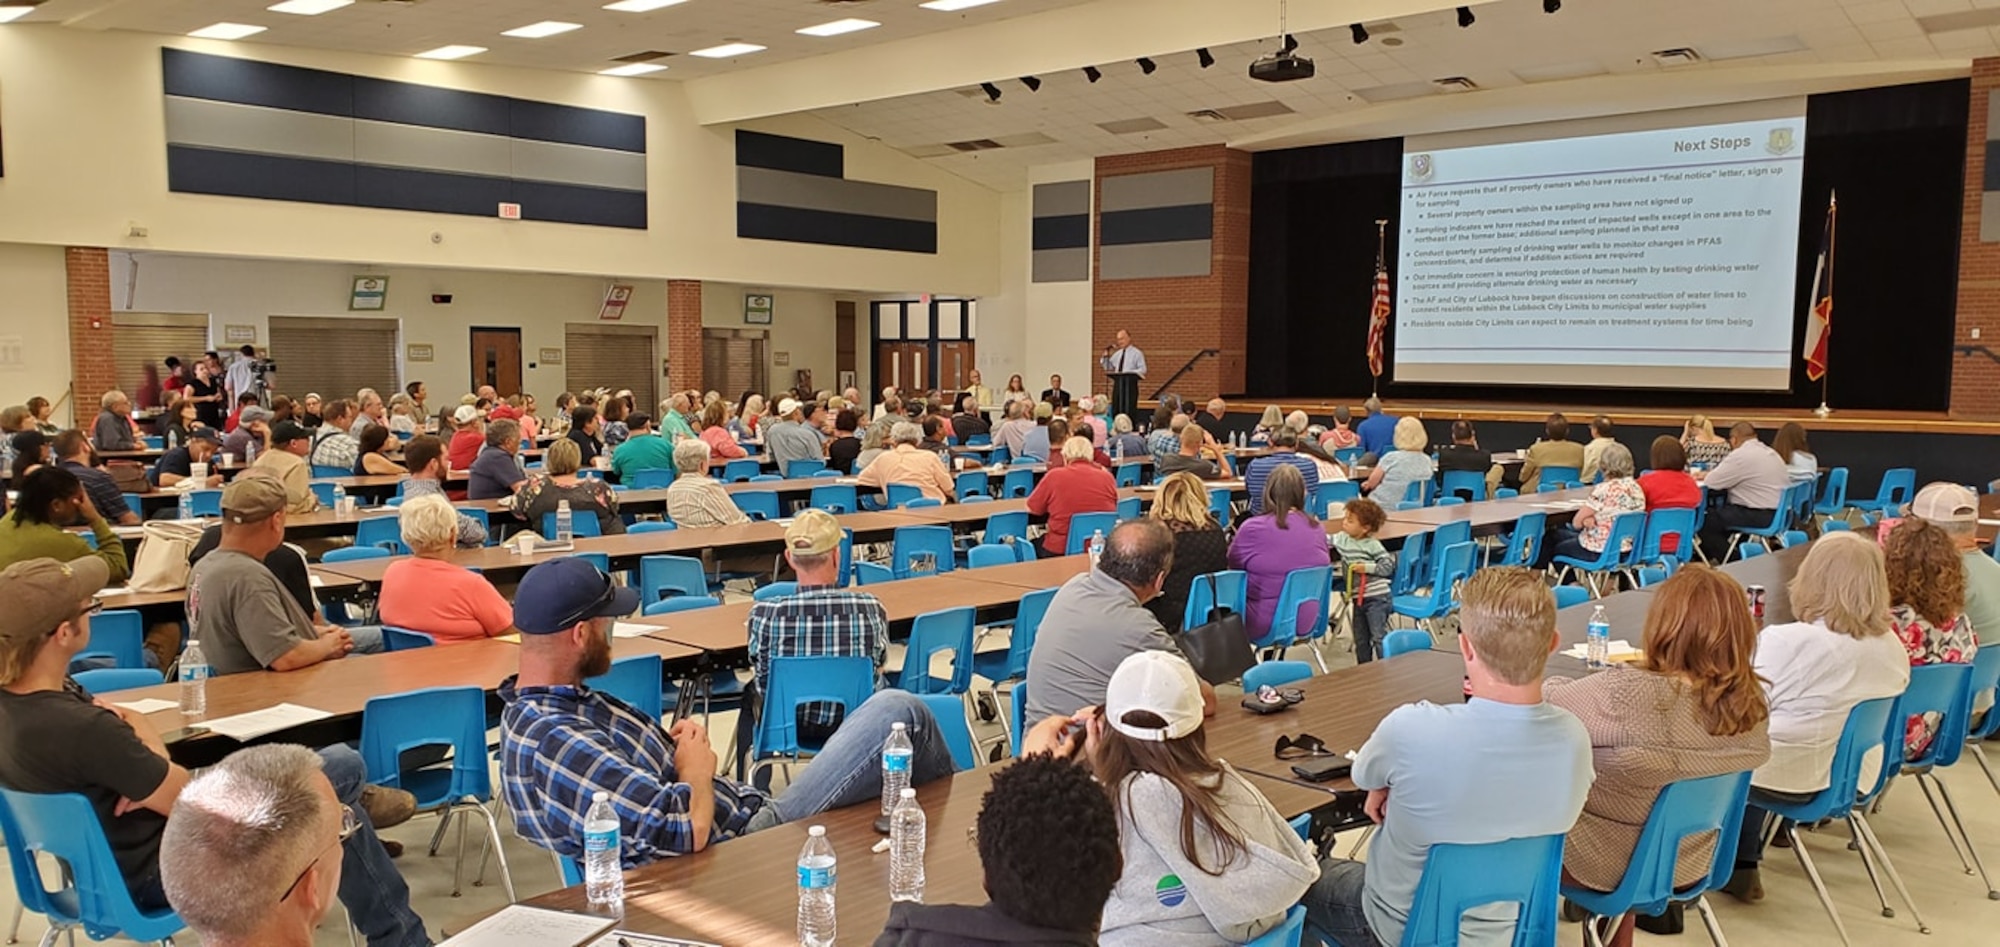 Representatives with the Air Force Base Realignment and Closure program host a public meeting in Lubbock, Texas, June 6, 2019. The meeting was to update the local community on the PFAS remediation efforts at former Reese Air Force Base. (U.S. Air Force photo by Malcolm McClendon)